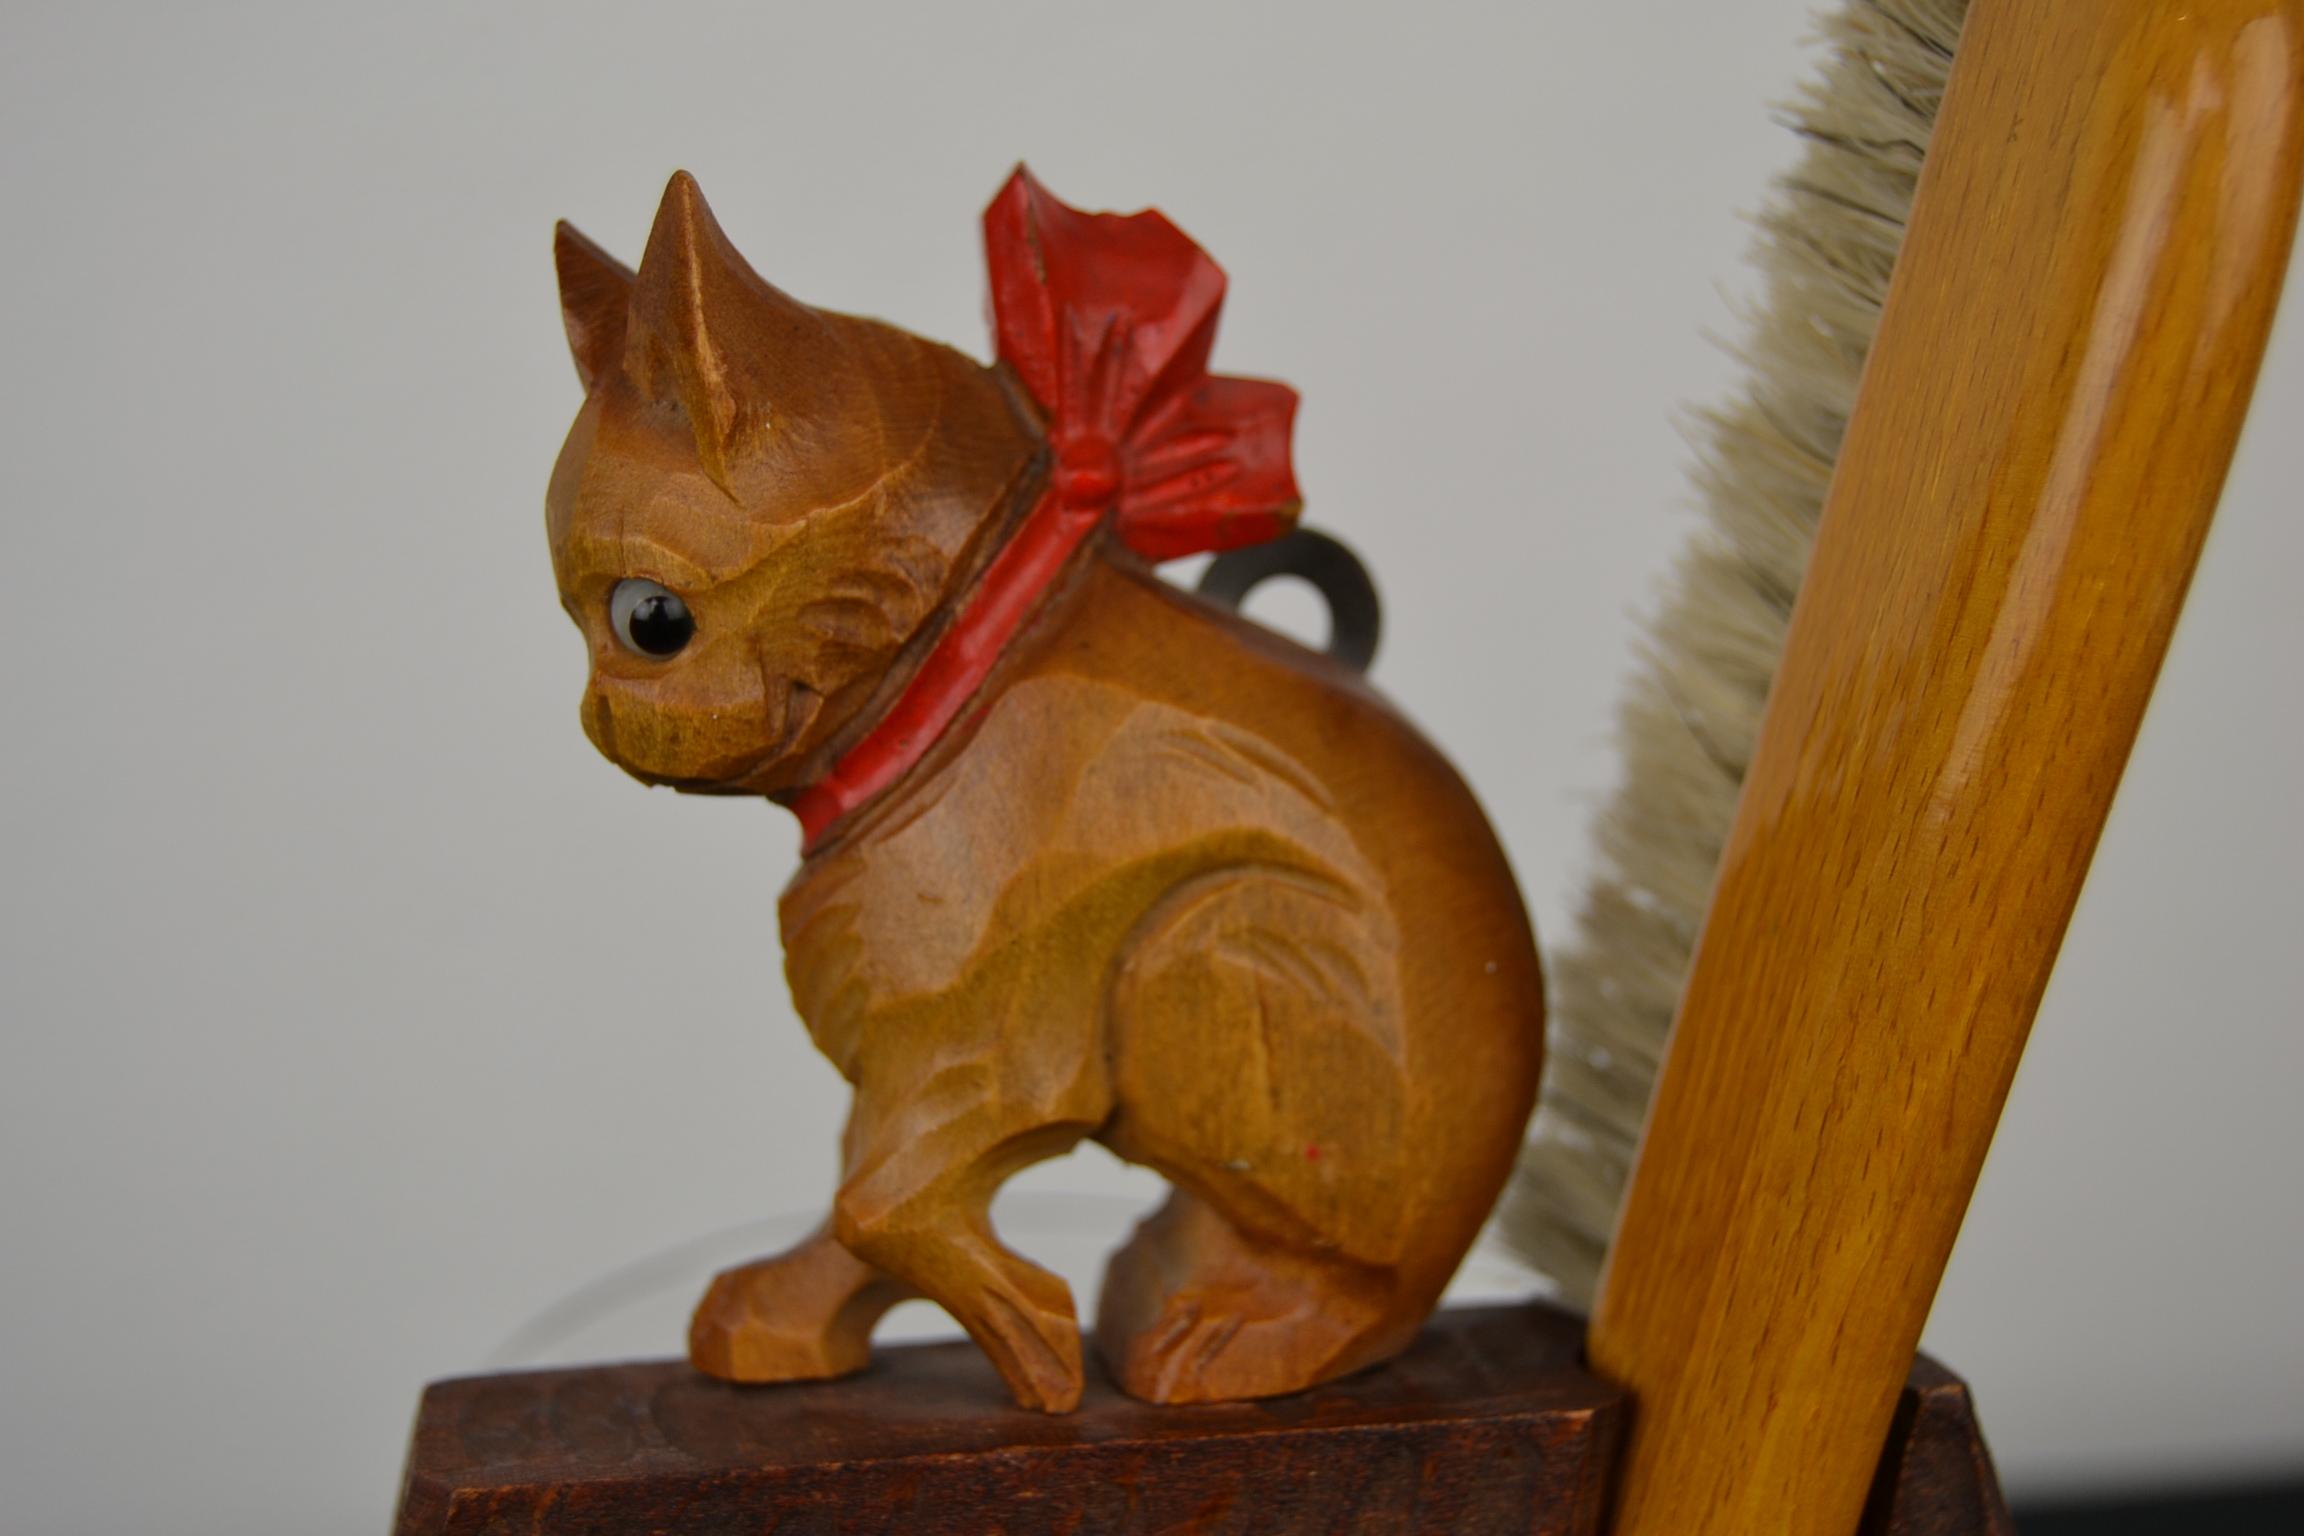 French bulldog crumb set, brush set.
This two-piece wooden set consists of a crumber or brush with a dustpan.
This antique tool for table-top crumbing has a cute French bulldog sculpture on top with a red bow around his neck. There is also a hook